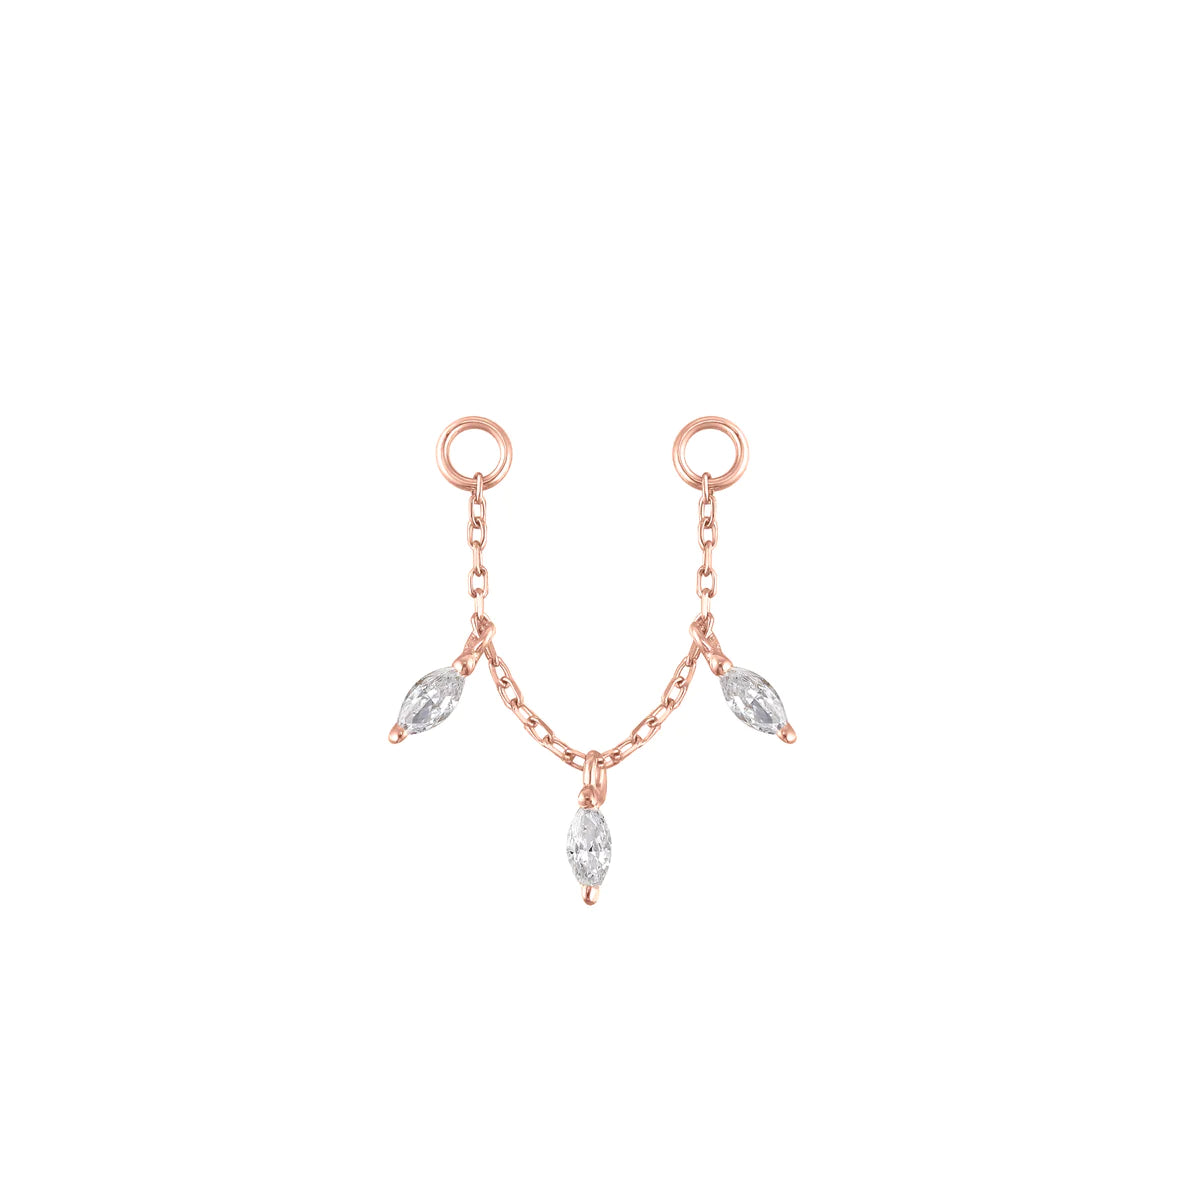 rose gold hanging chains for piercings with cubic zirconias